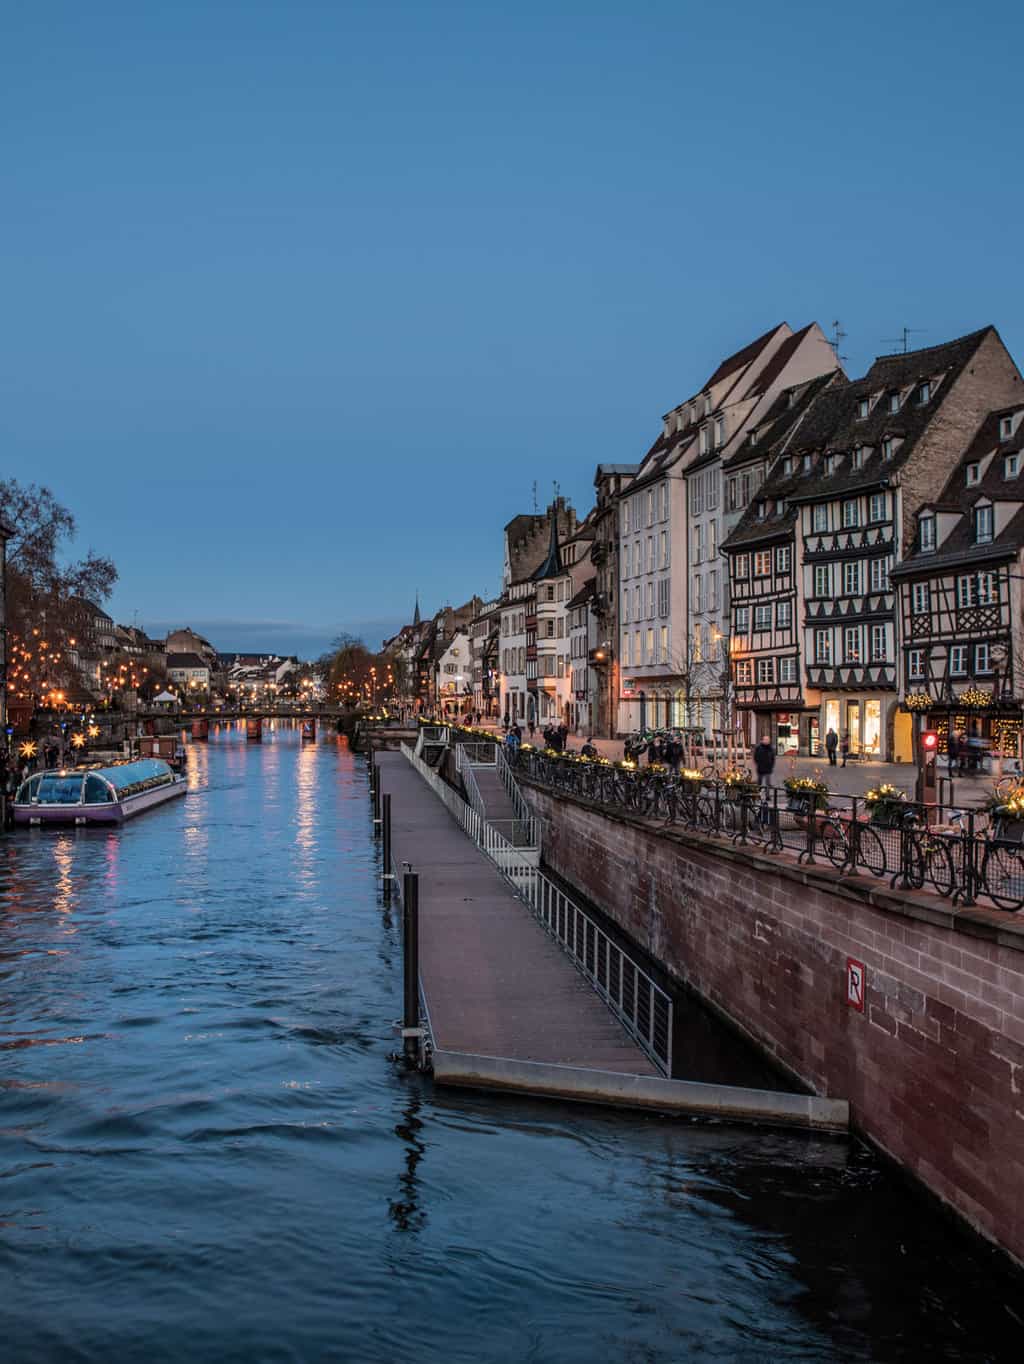 Twinkling lights decorate the river edge in the old town of Strasbourg at Christmas.